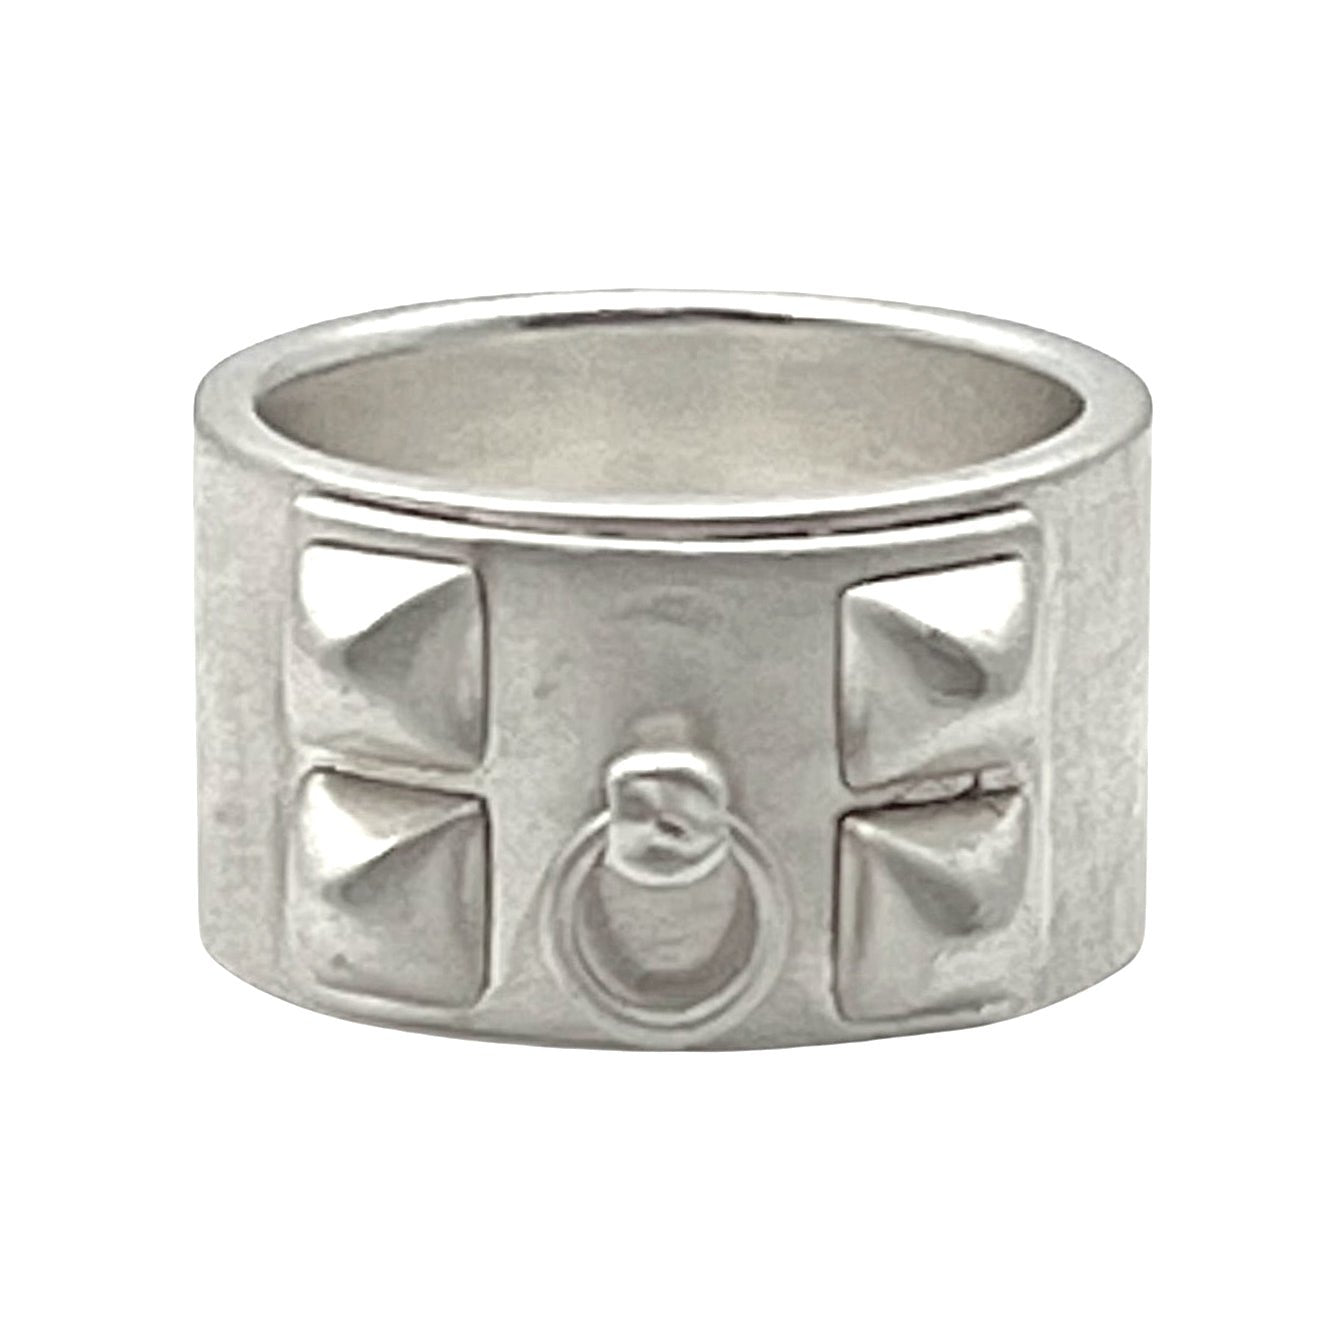 Hermes - Sterling Silver Collier de Chien Wide Band Ring